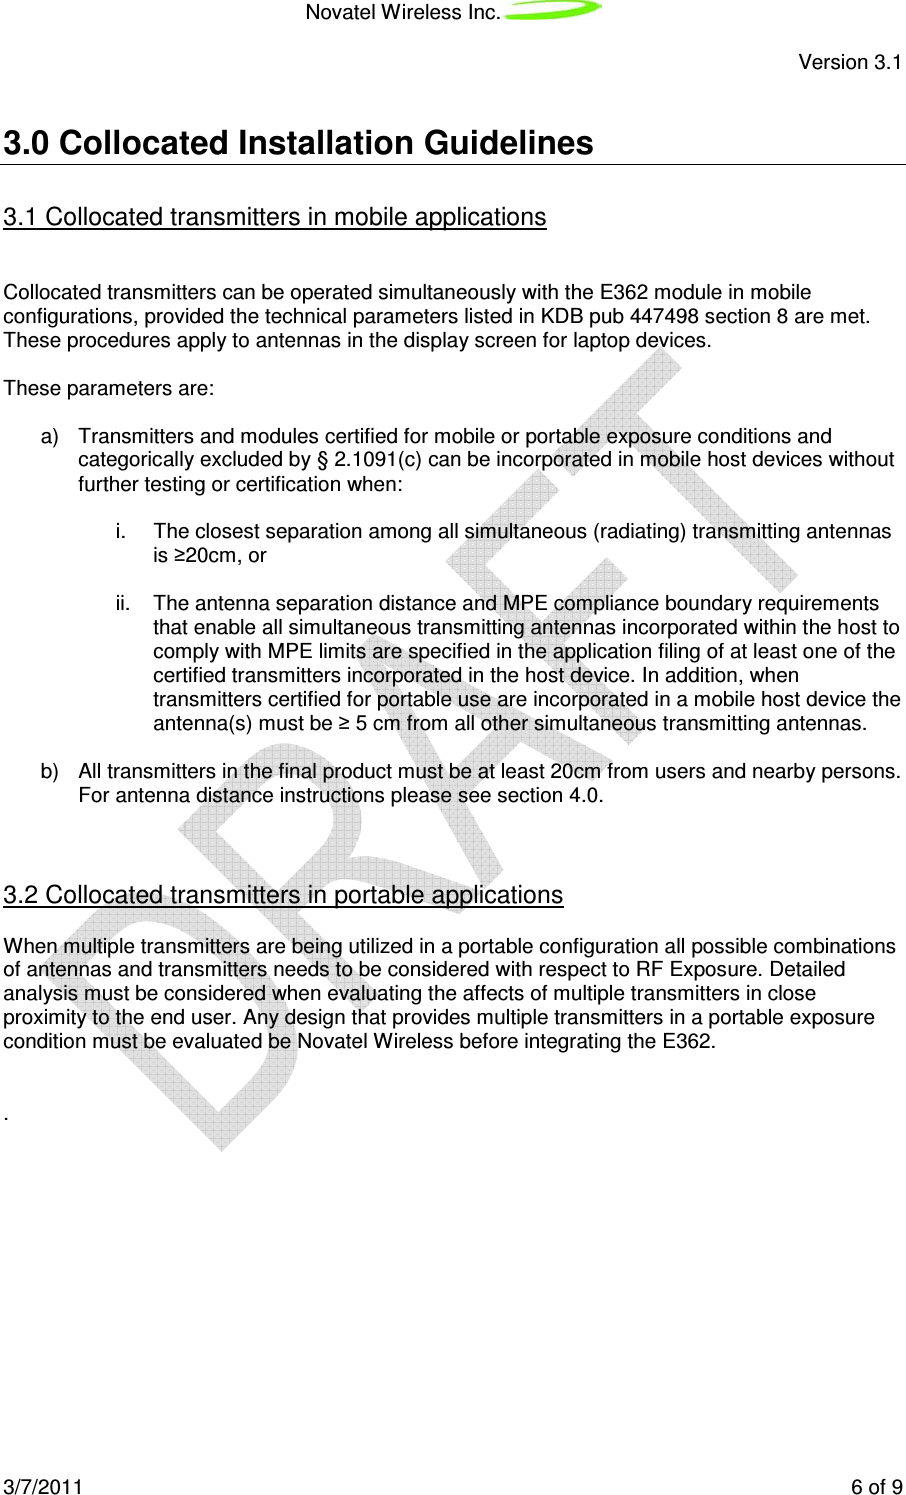 Novatel Wireless Inc.  Version 3.1 3/7/2011    6 of 9  3.0 Collocated Installation Guidelines 3.1 Collocated transmitters in mobile applications  Collocated transmitters can be operated simultaneously with the E362 module in mobile configurations, provided the technical parameters listed in KDB pub 447498 section 8 are met. These procedures apply to antennas in the display screen for laptop devices.  These parameters are:  a)  Transmitters and modules certified for mobile or portable exposure conditions and categorically excluded by § 2.1091(c) can be incorporated in mobile host devices without further testing or certification when:   i.  The closest separation among all simultaneous (radiating) transmitting antennas is ≥20cm, or  ii.  The antenna separation distance and MPE compliance boundary requirements that enable all simultaneous transmitting antennas incorporated within the host to comply with MPE limits are specified in the application filing of at least one of the certified transmitters incorporated in the host device. In addition, when transmitters certified for portable use are incorporated in a mobile host device the antenna(s) must be ≥ 5 cm from all other simultaneous transmitting antennas.  b)  All transmitters in the final product must be at least 20cm from users and nearby persons. For antenna distance instructions please see section 4.0.   3.2 Collocated transmitters in portable applications  When multiple transmitters are being utilized in a portable configuration all possible combinations of antennas and transmitters needs to be considered with respect to RF Exposure. Detailed analysis must be considered when evaluating the affects of multiple transmitters in close proximity to the end user. Any design that provides multiple transmitters in a portable exposure condition must be evaluated be Novatel Wireless before integrating the E362.   .